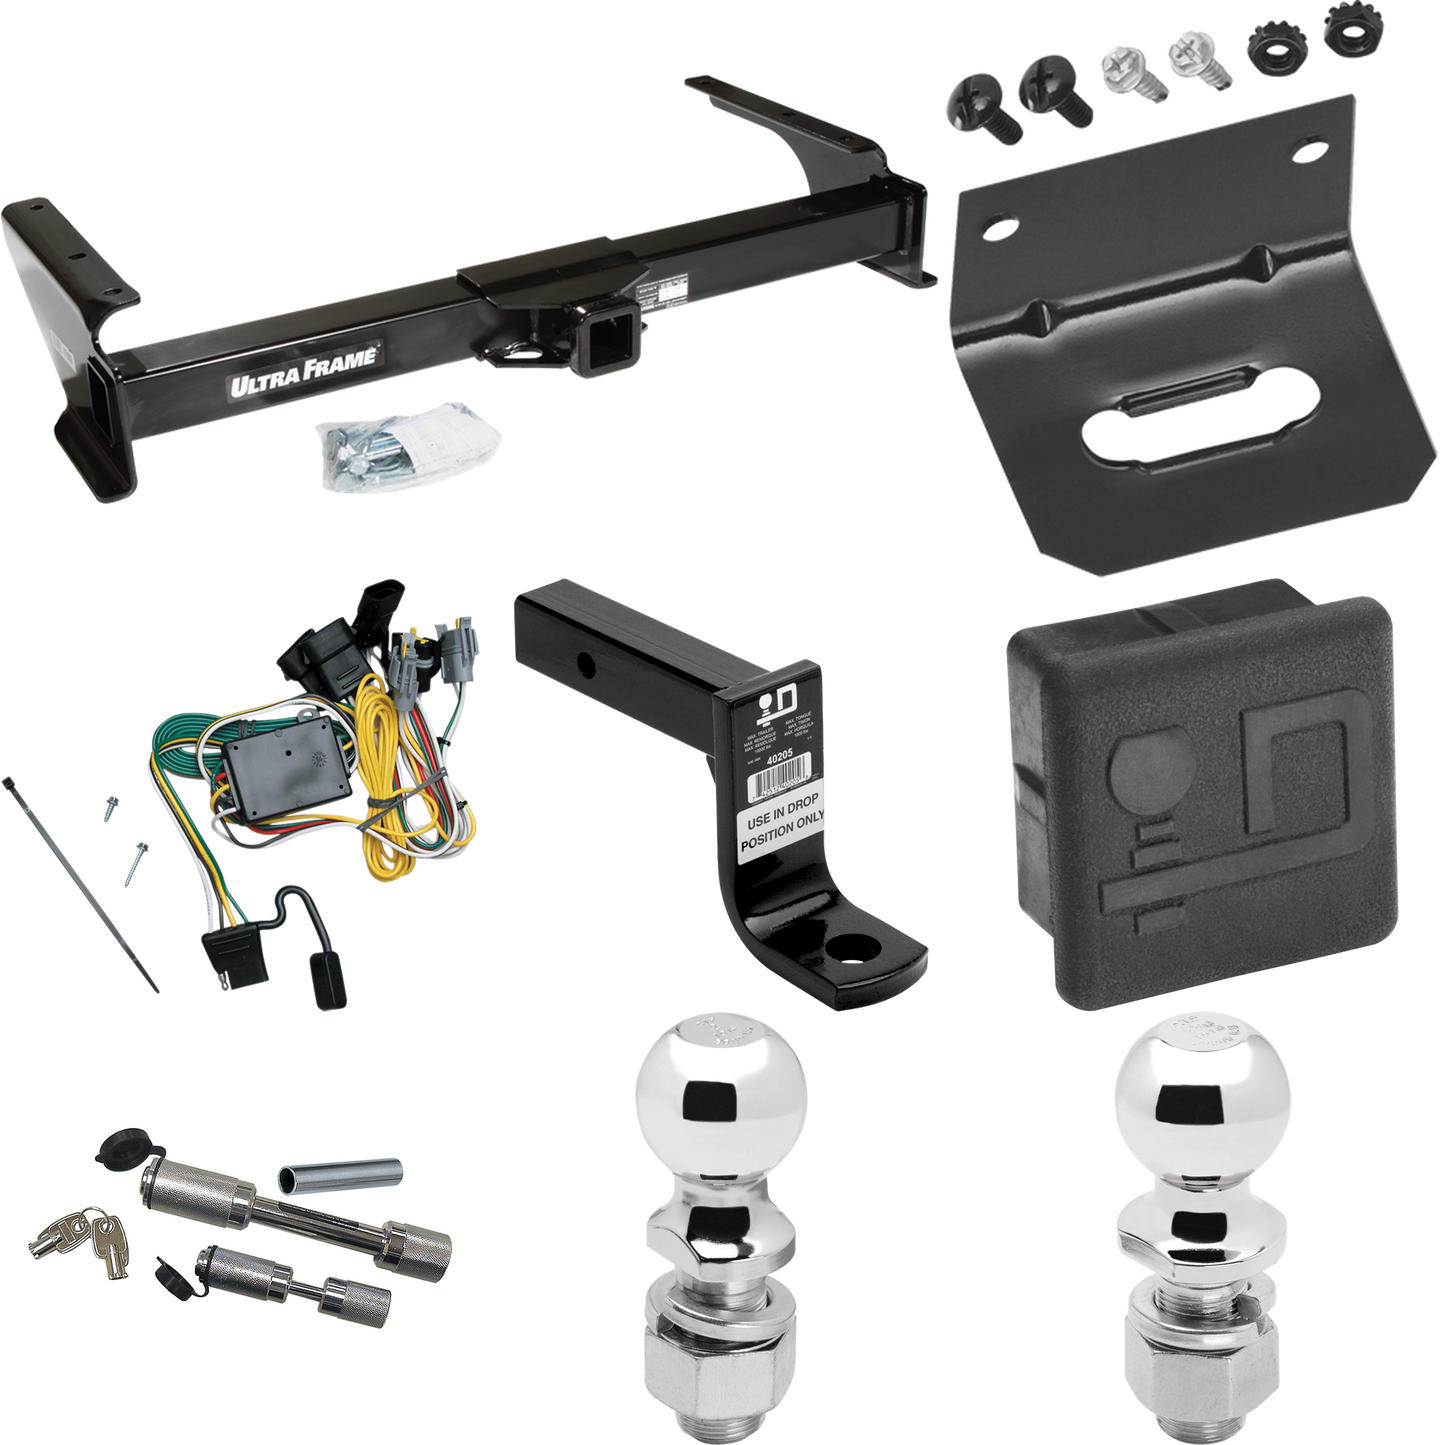 Fits 1992-1994 Ford E-250 Econoline Trailer Hitch Tow PKG w/ 4-Flat Wiring Harness + Ball Mount w/ 6" Drop + Dual Hitch & Coupler Locks + 2" Ball + 2-5/16" Ball + Hitch Cover + Wiring Bracket By Draw-Tite